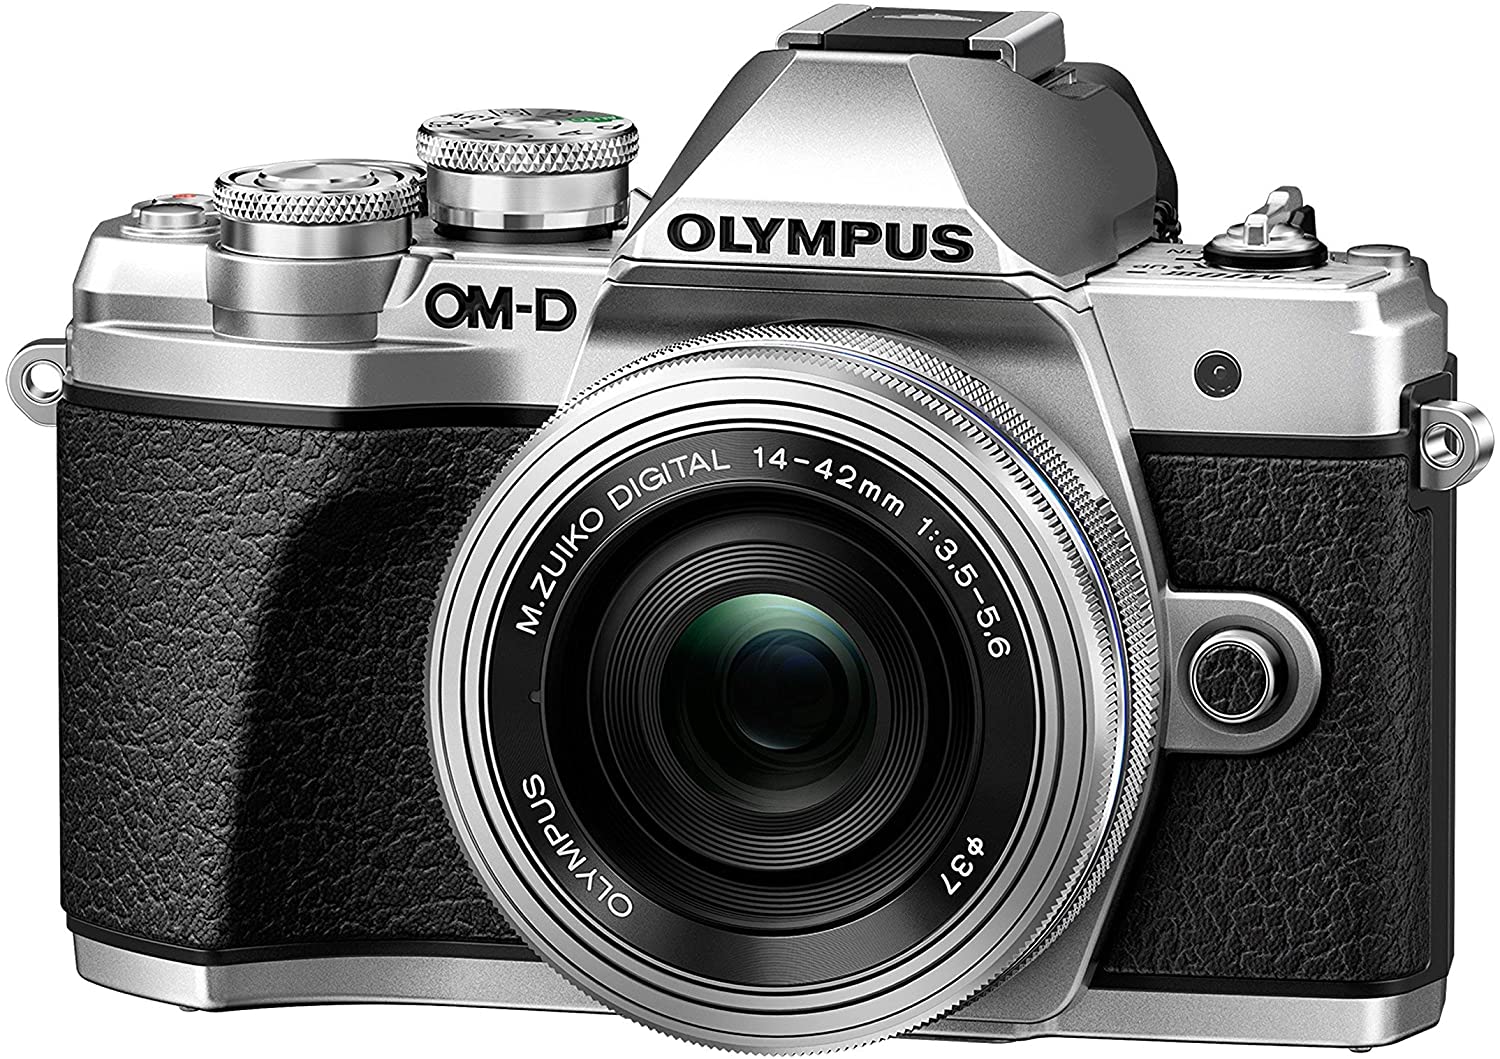 Olympus OM-D E-M10 Mark III with 14-42mm Lens